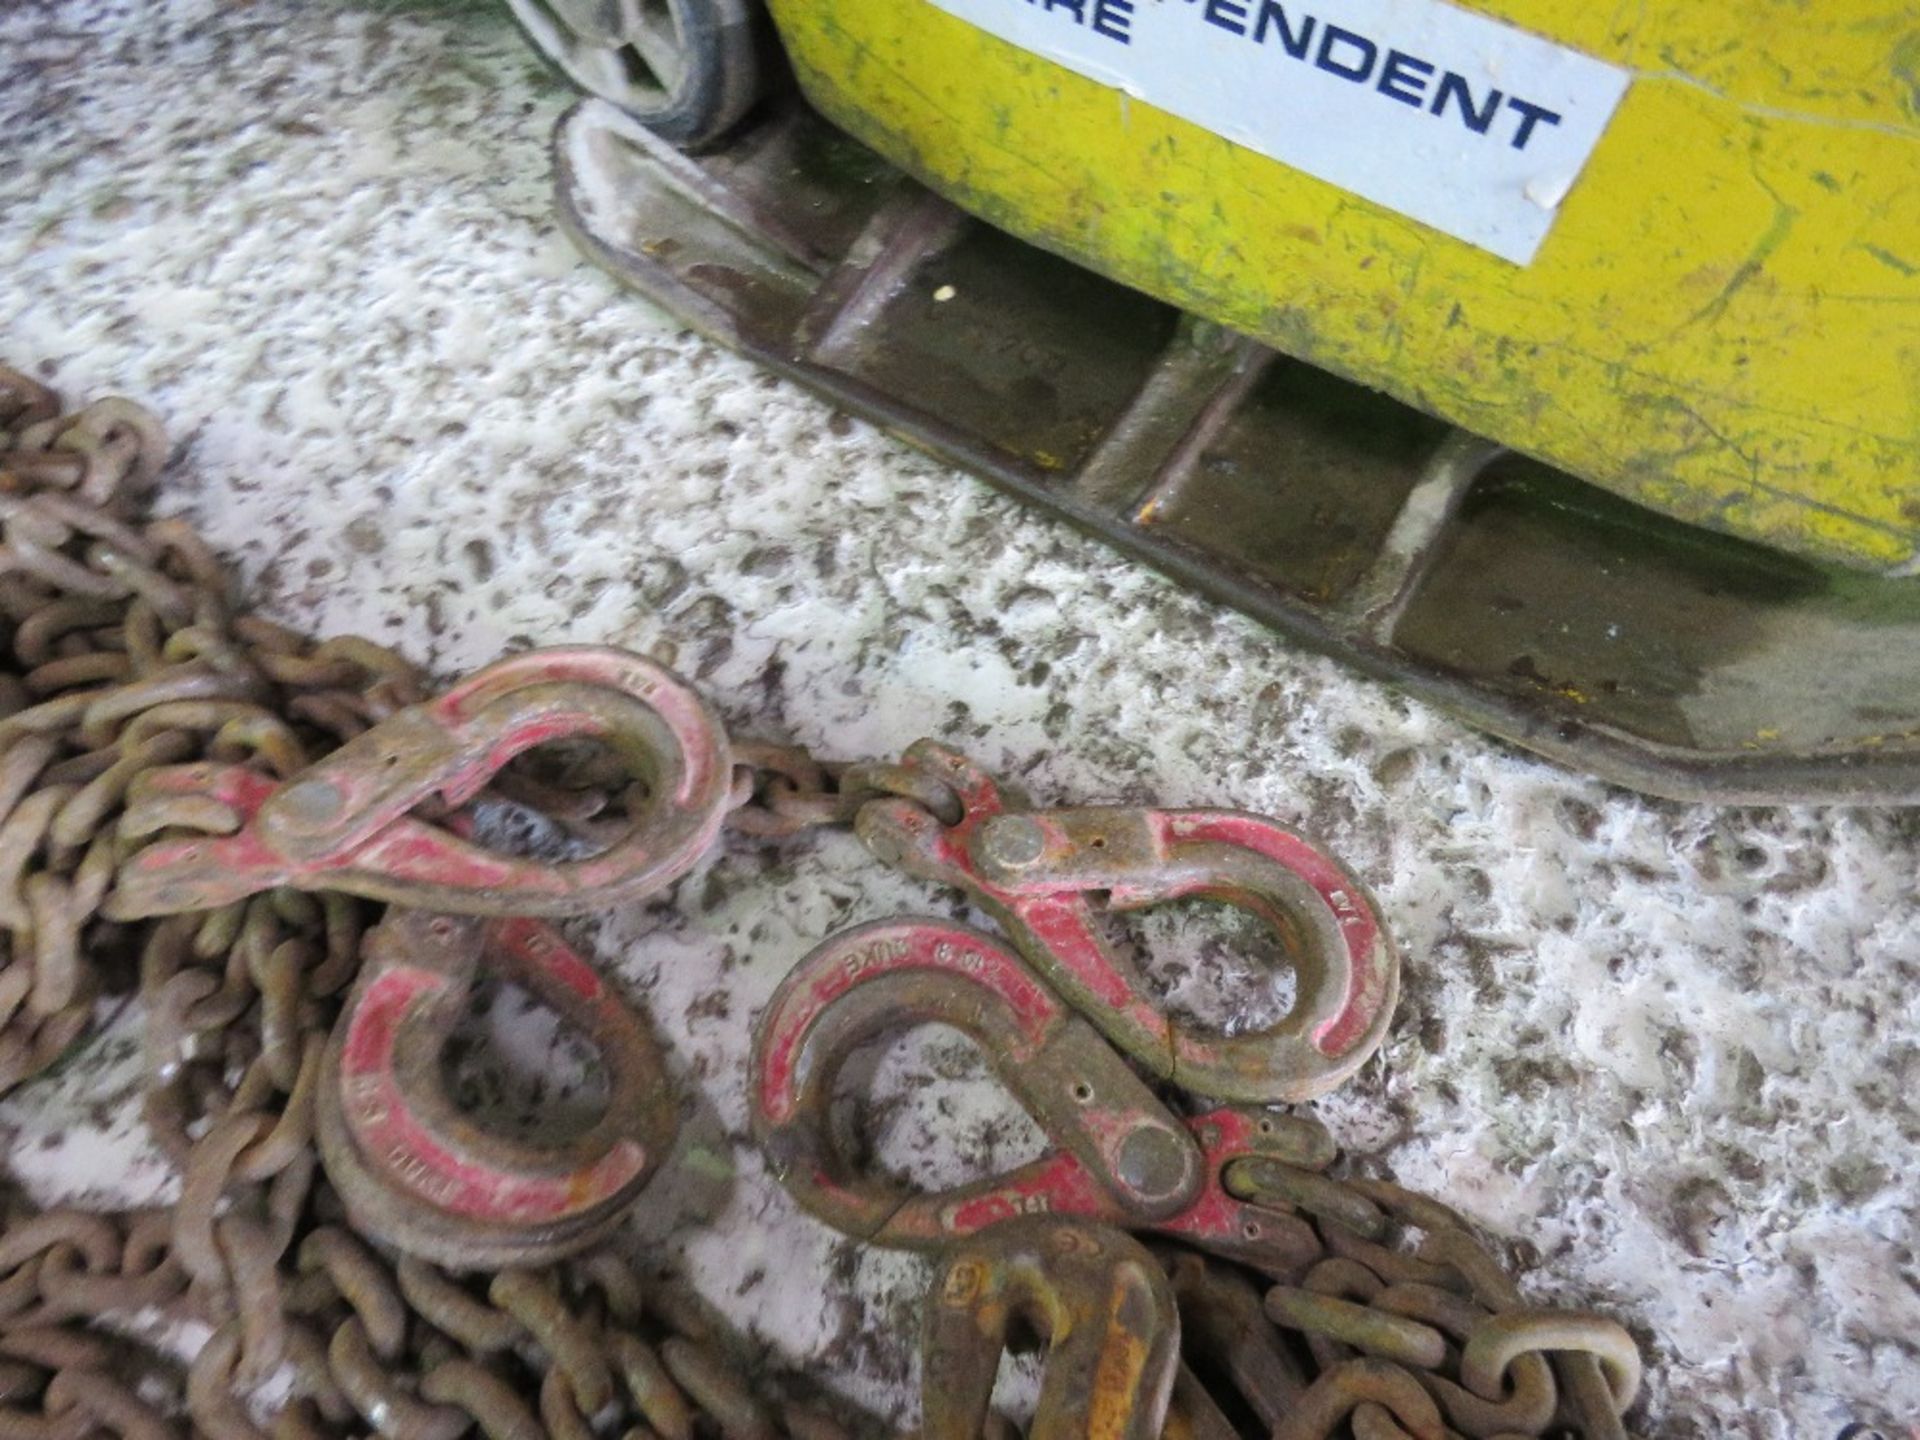 4 LEGGED LIFTING CHAINS WITH SHORTENERS, 19FT OVERALL LENGTH APPROX. - Image 4 of 4